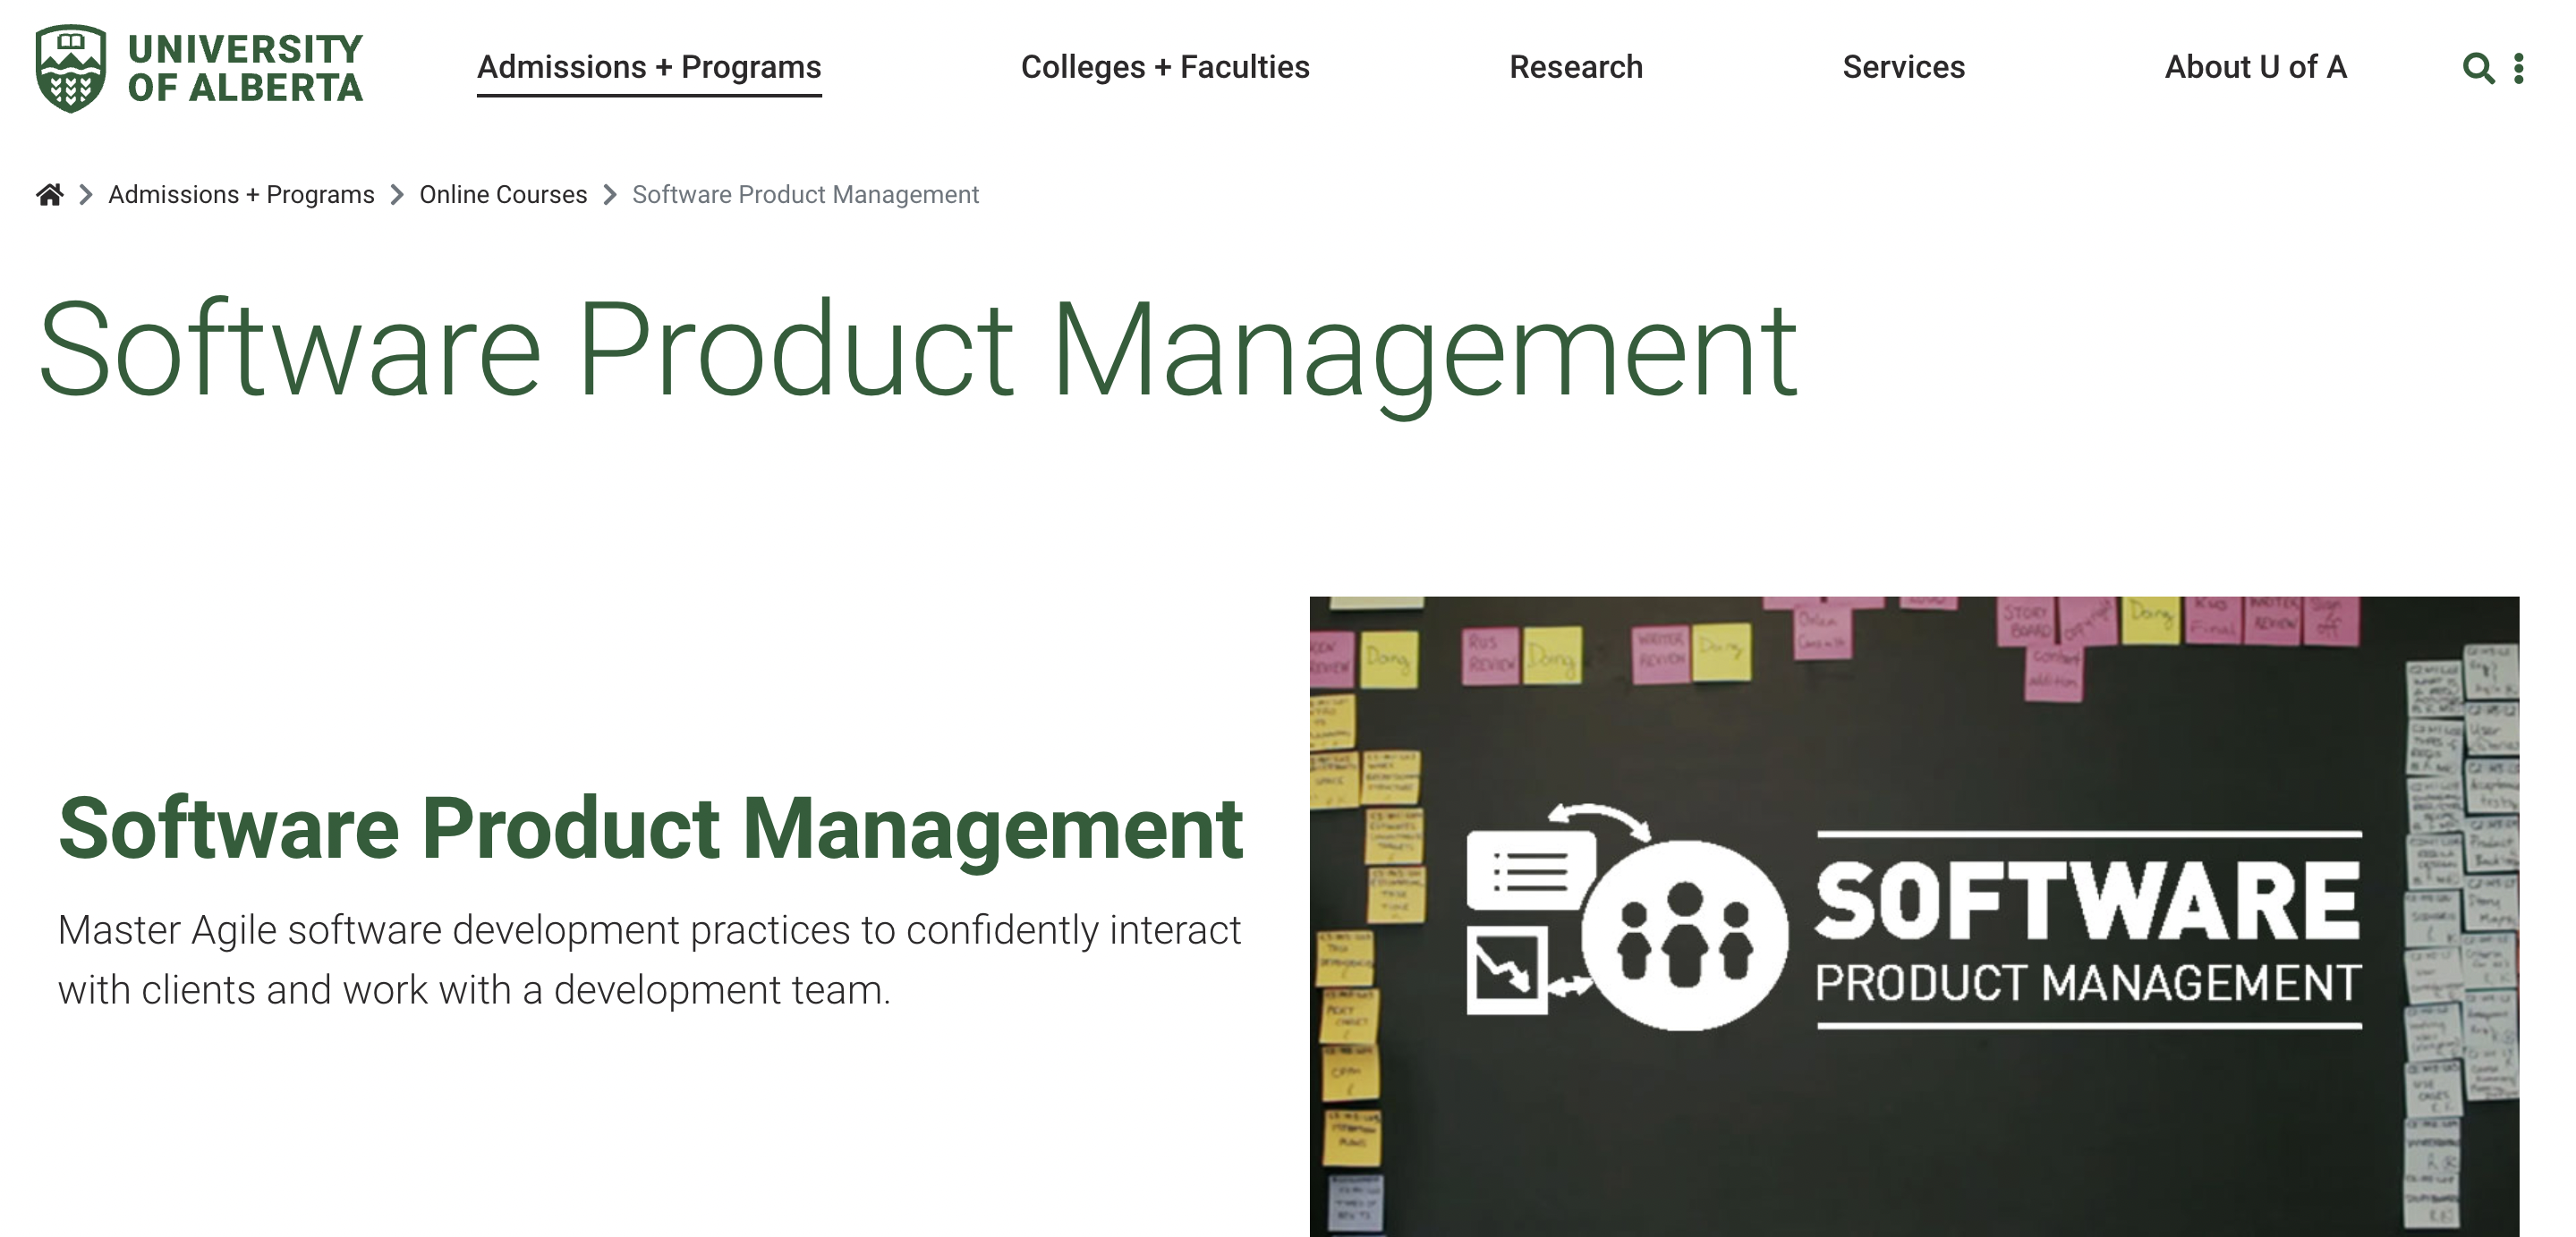 Software Product Management course by University of Alberta